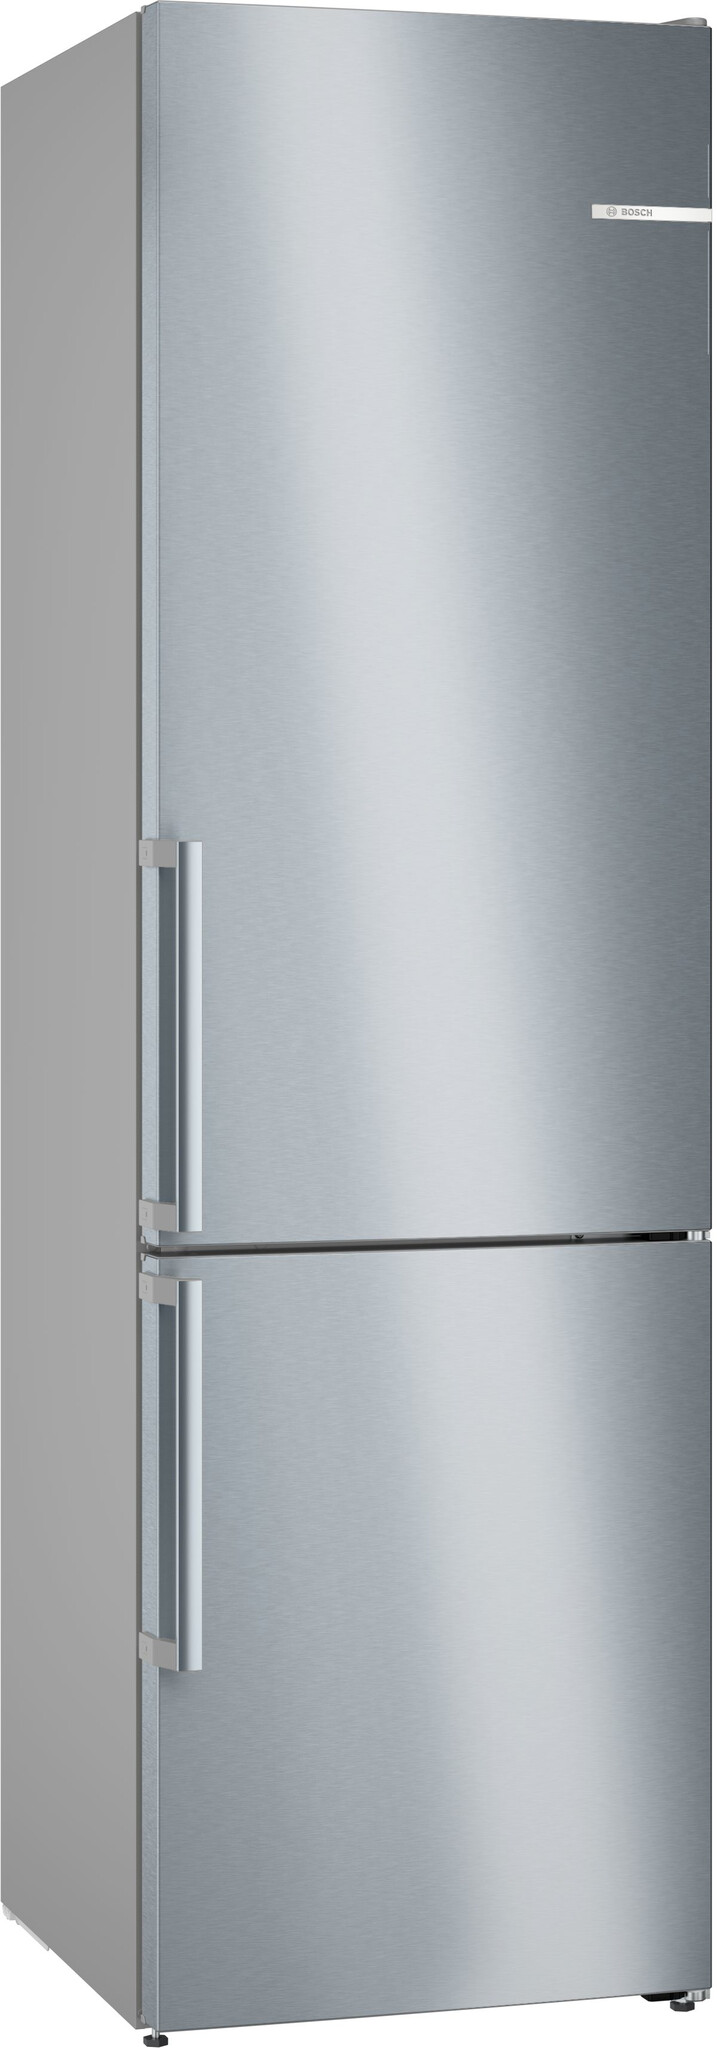 Bosch Series 6 KGN39AIAT 70/30 Frost Free Fridge Freezer – Stainless Steel Effect – A Rated #366161